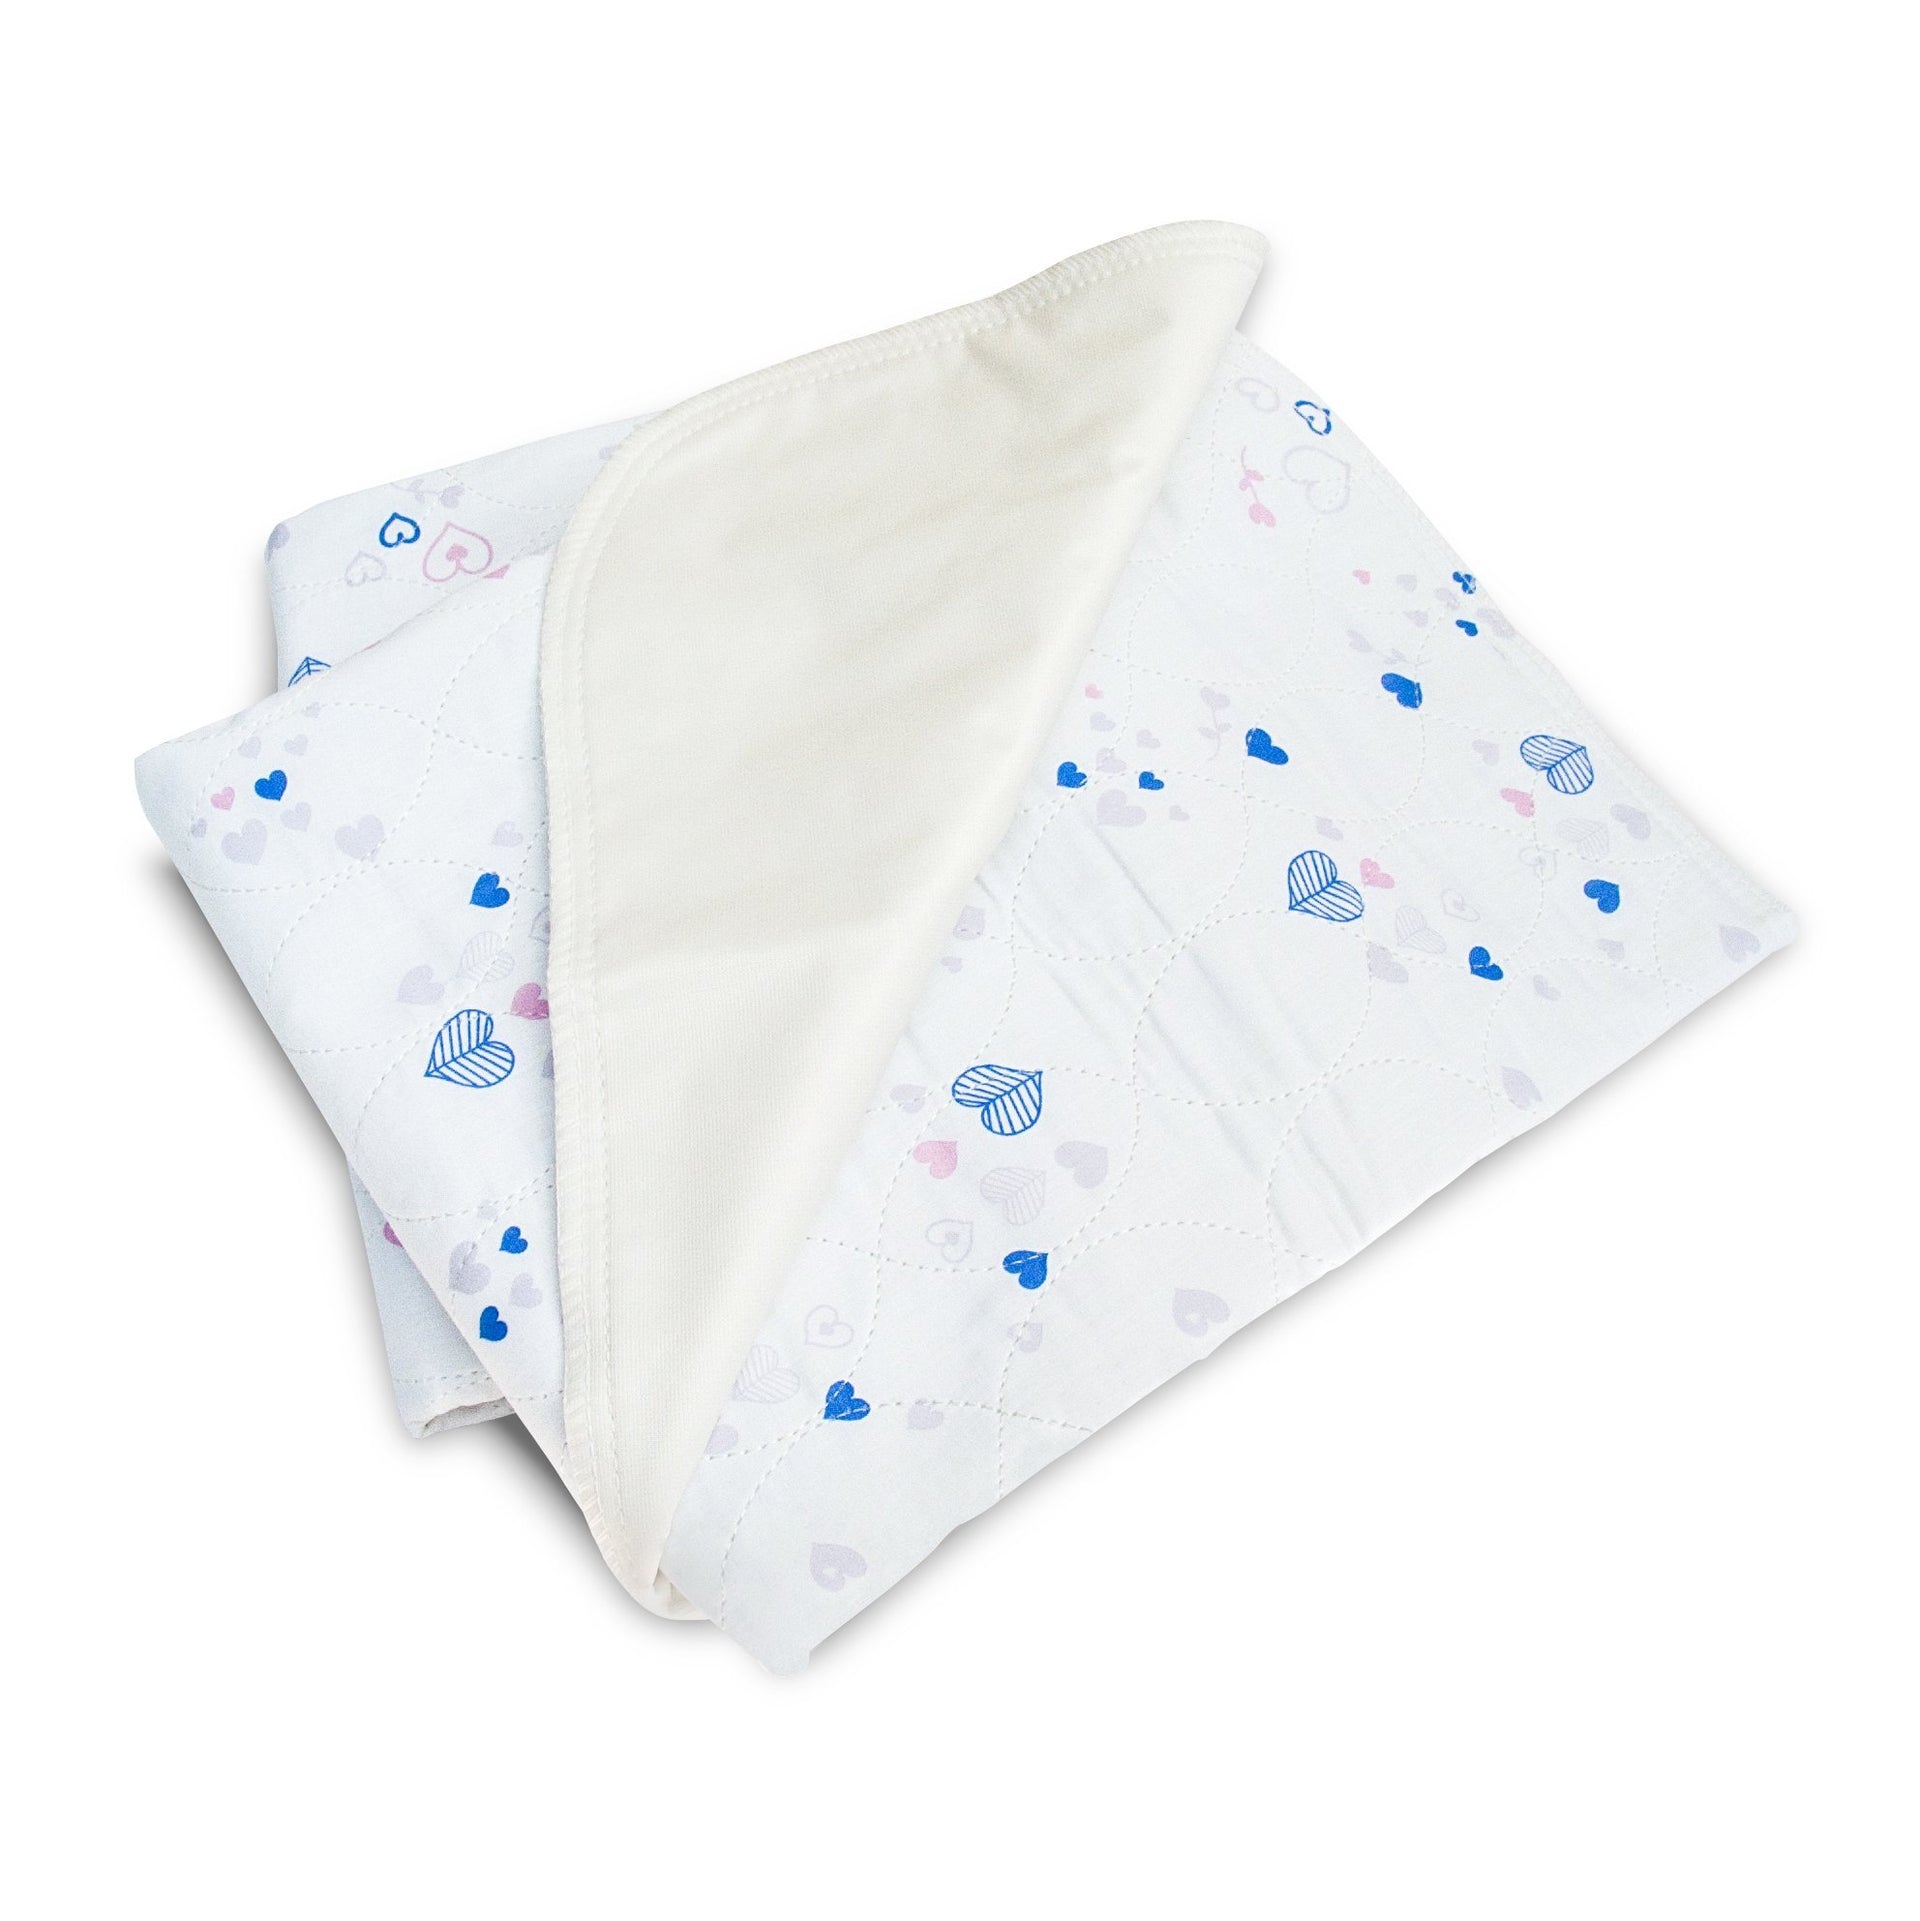 Waterproof Bed Pad with Heart and Flower Design - Classy Pal Bed Pad